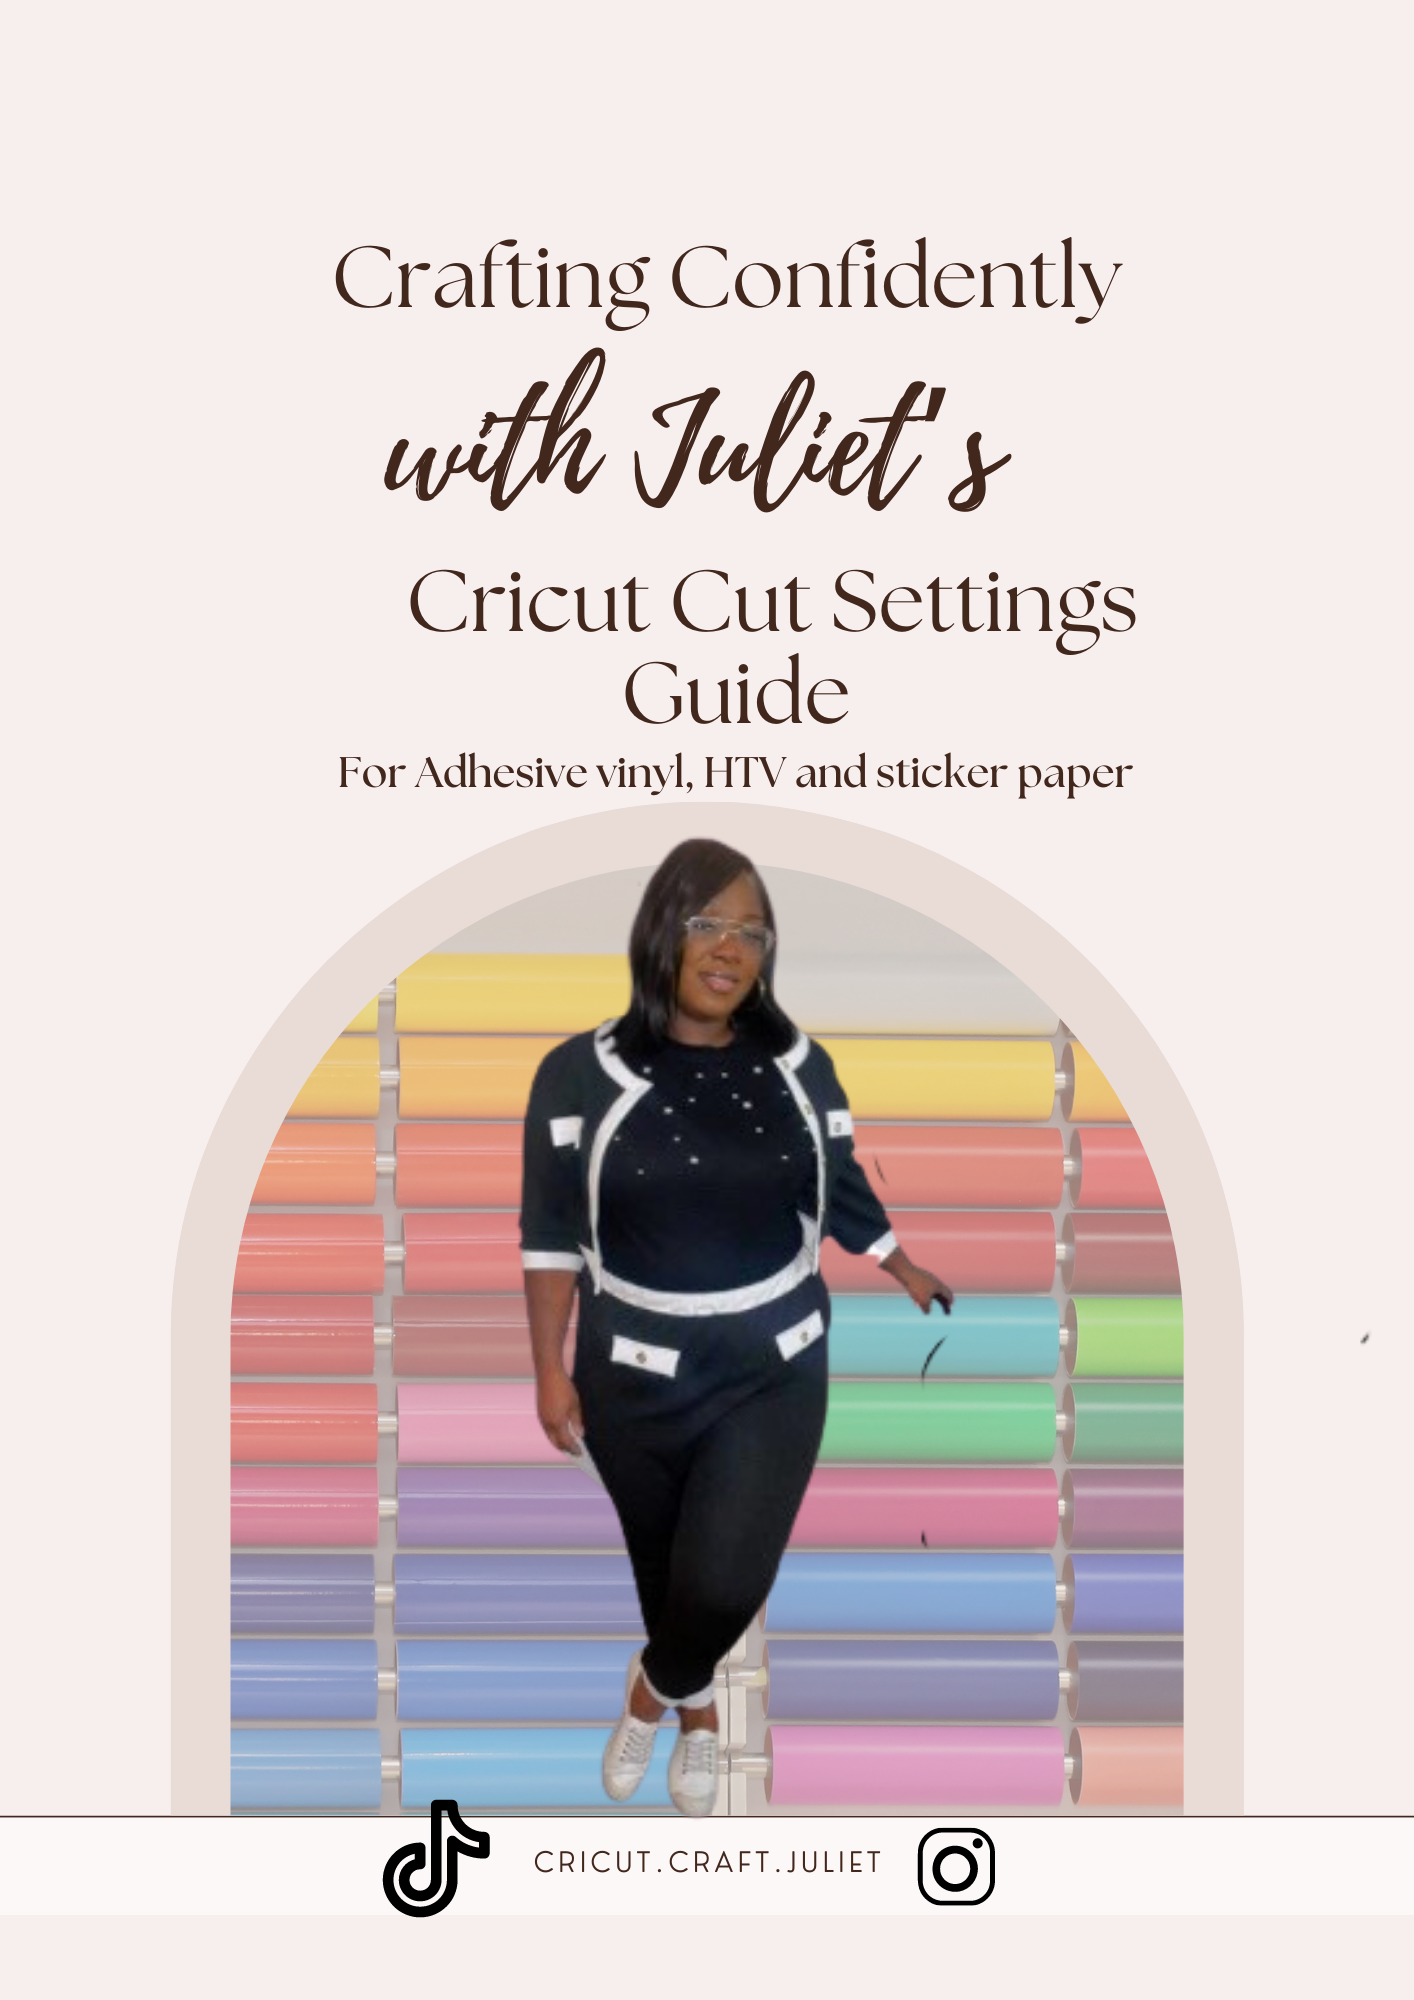 Crafting confidently with Juliet's Cricut cut settings E-guide